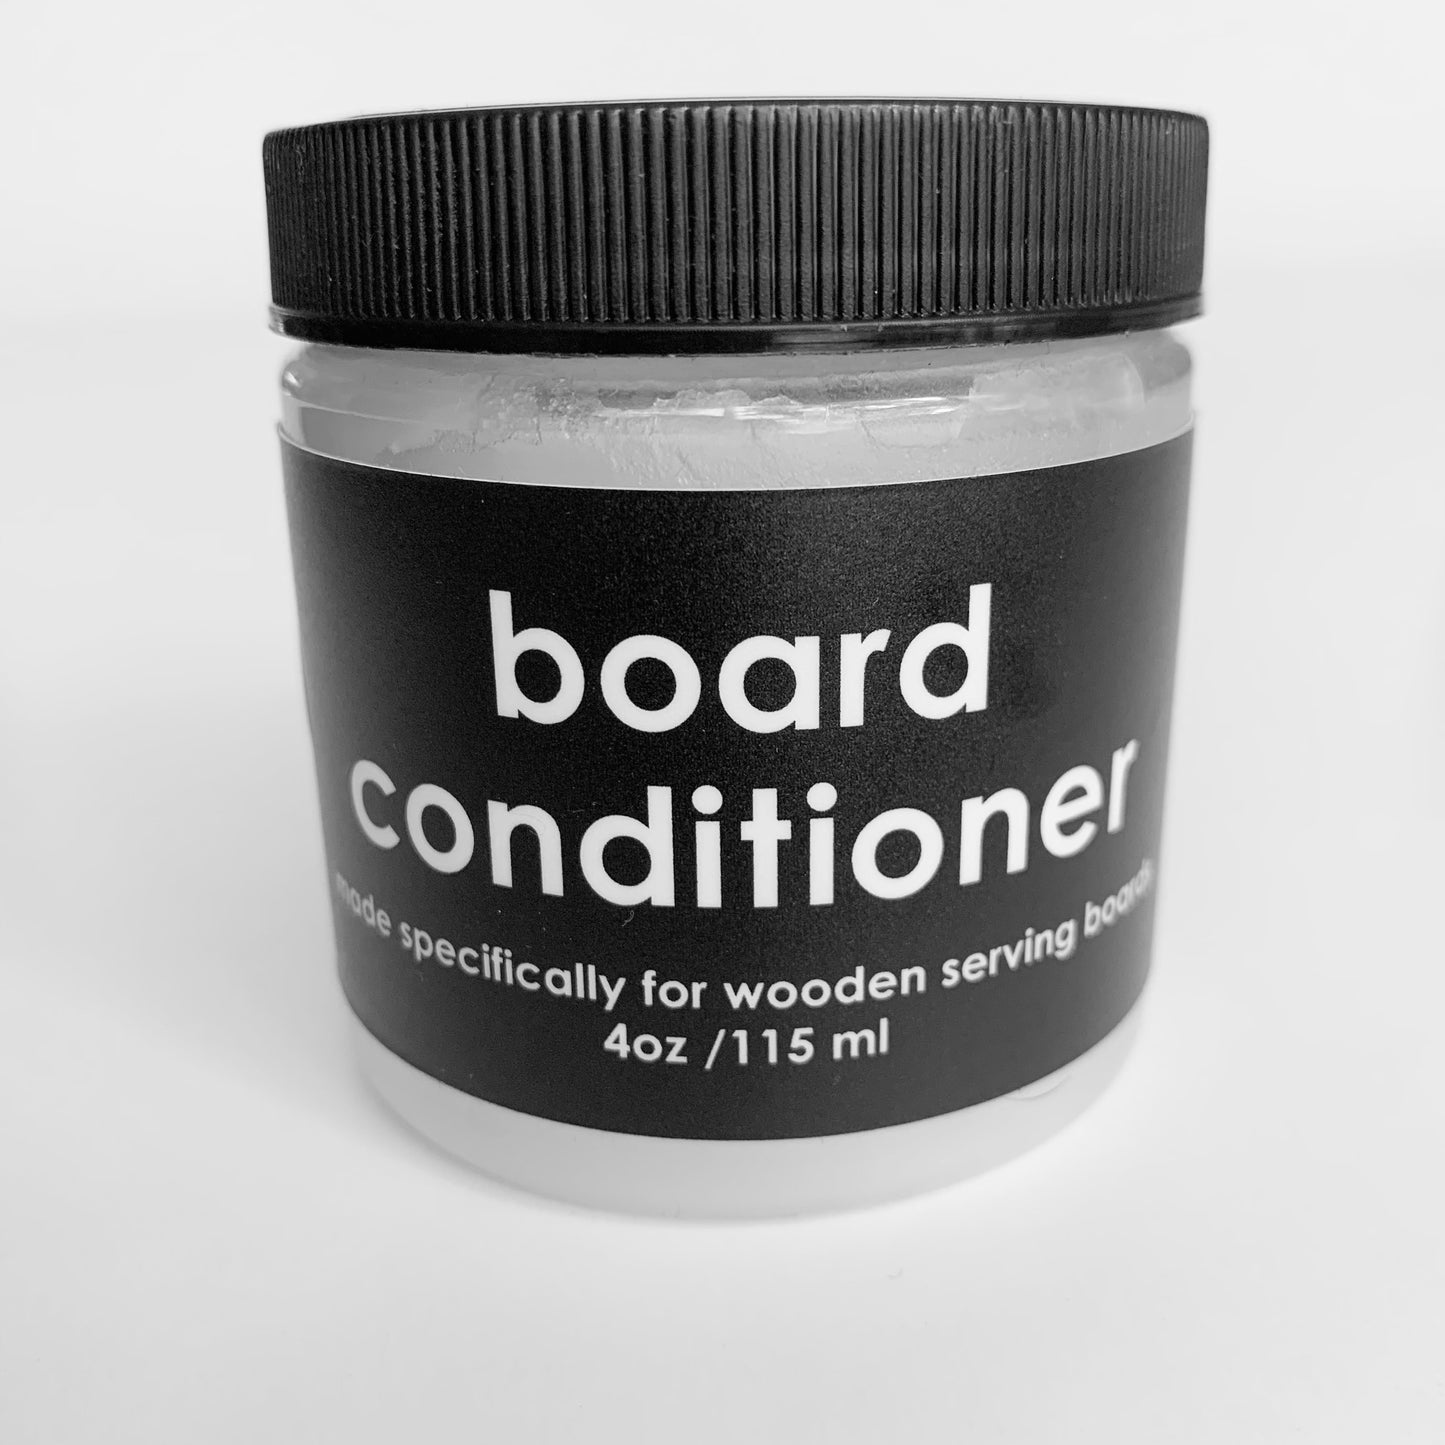 This image shows the Serving Board Conditioner packaging that keeps your wooden boards in great shape. 